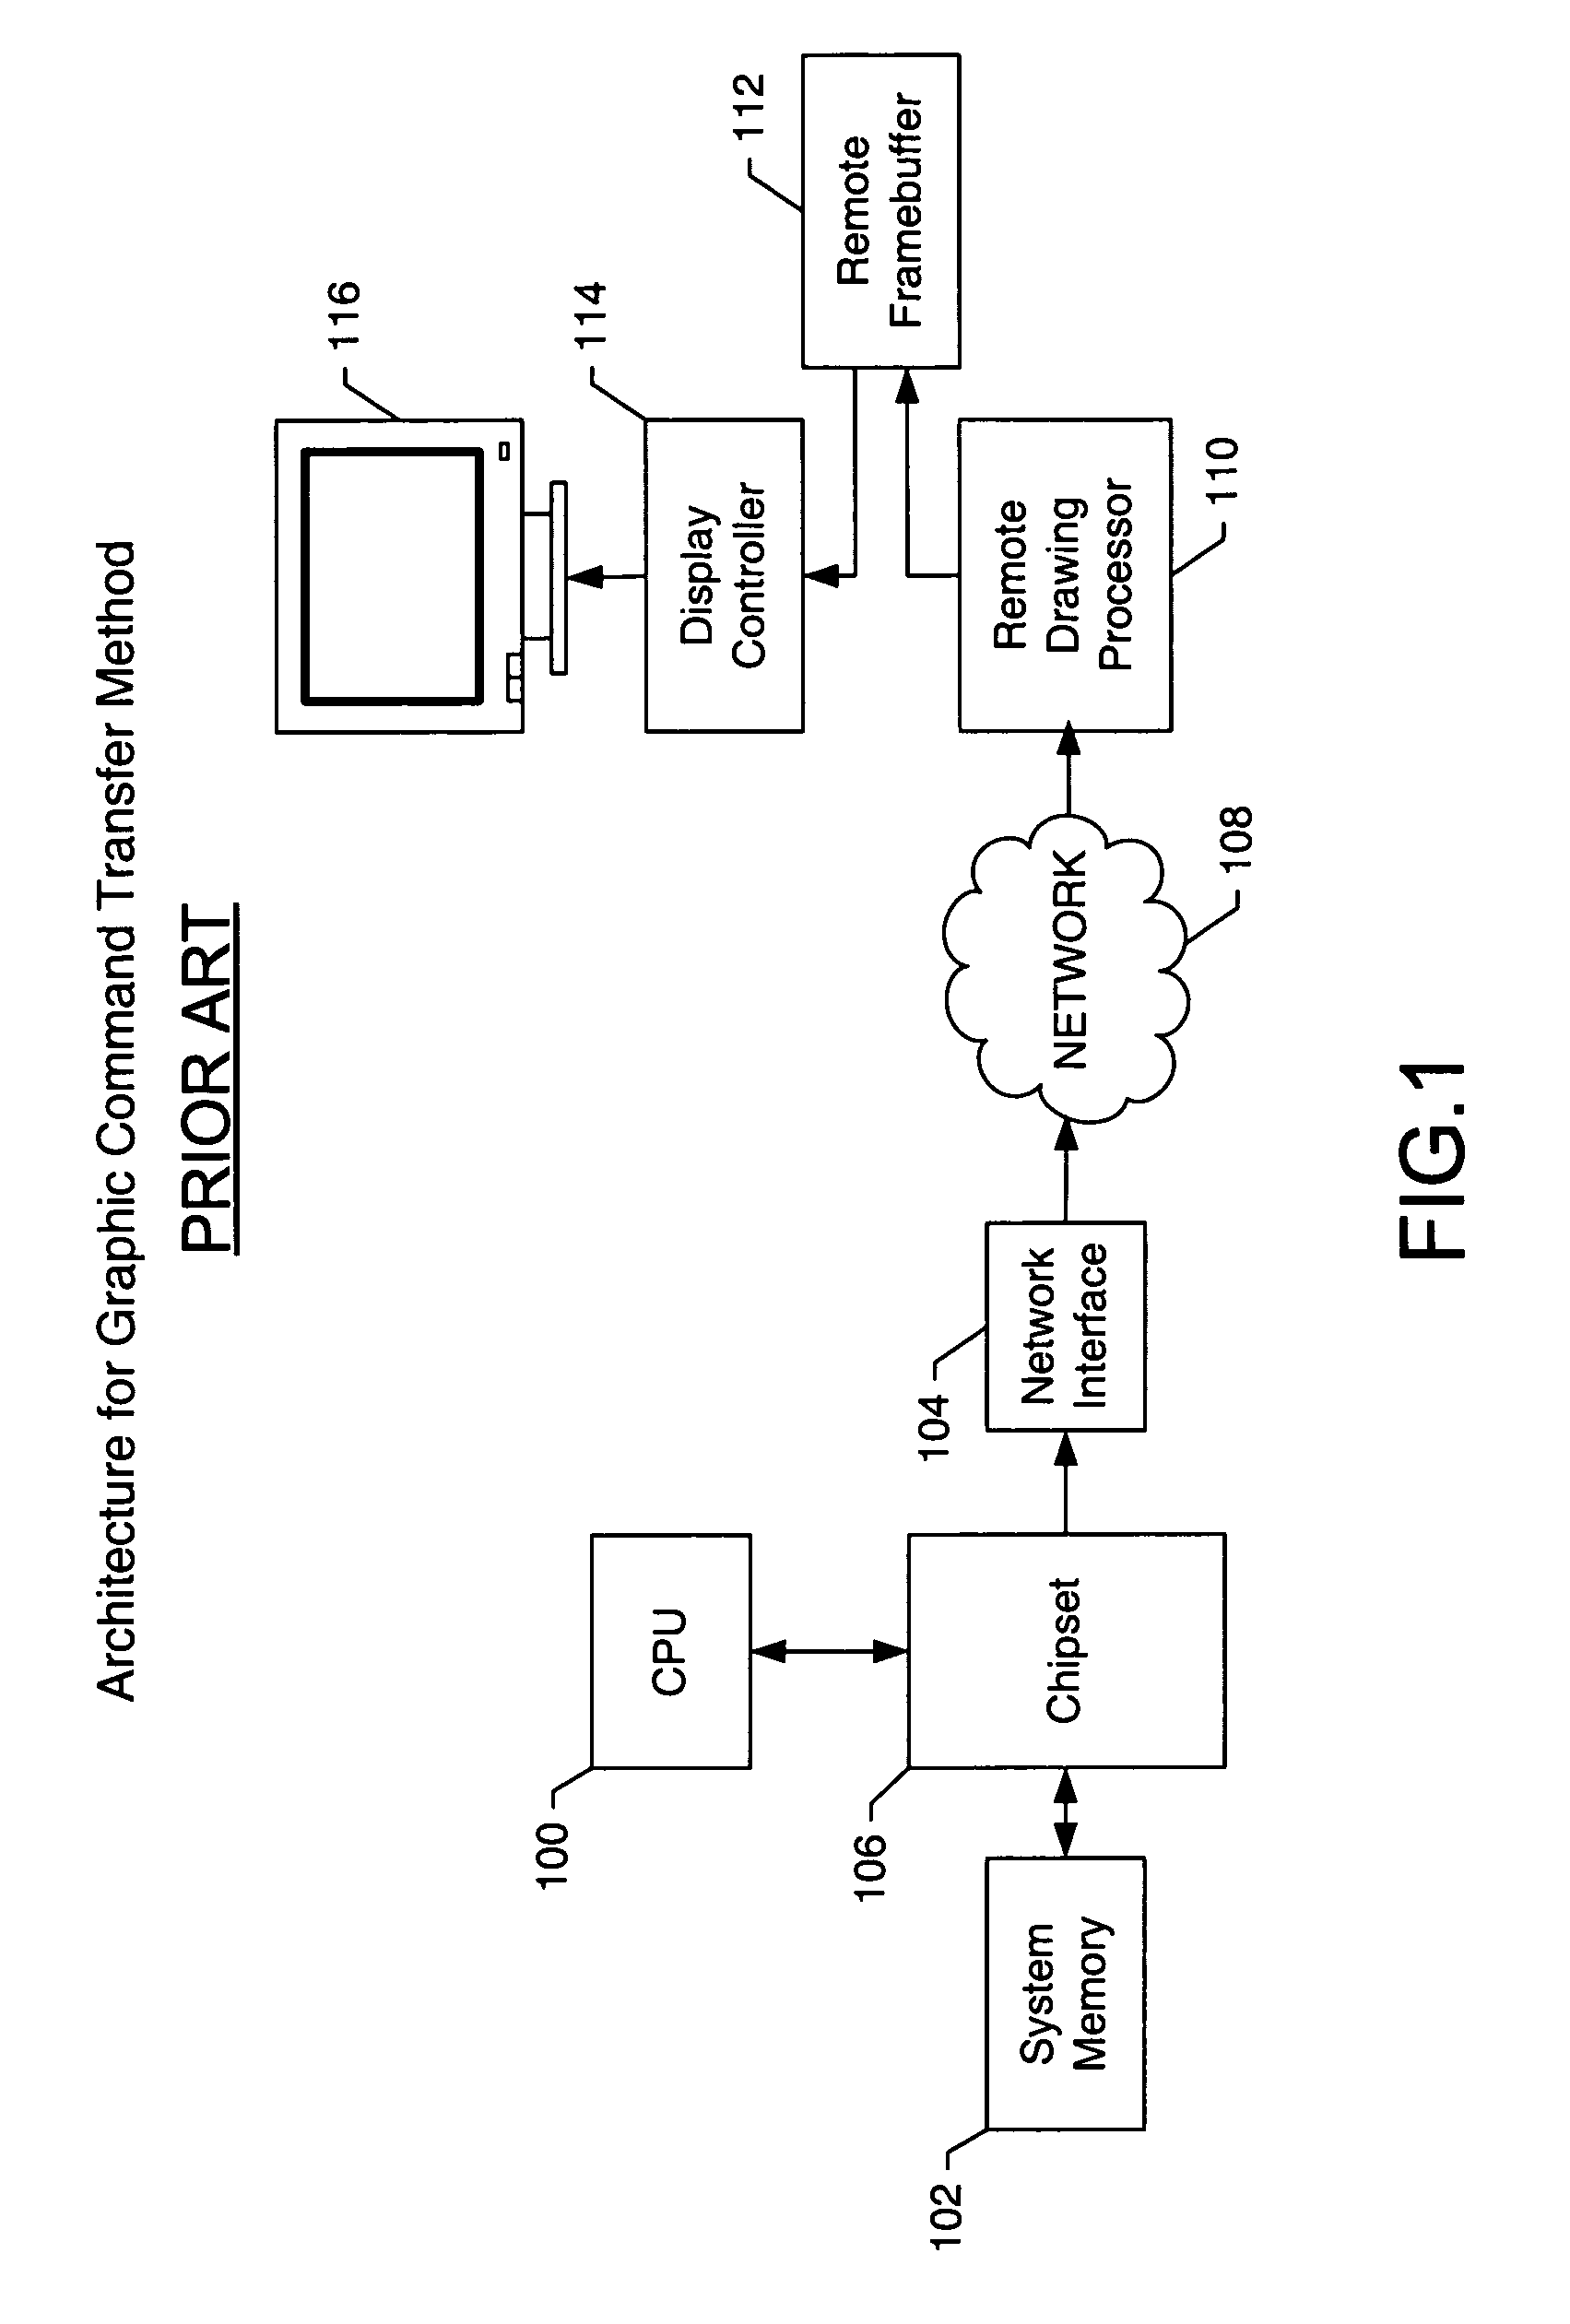 Methods and apparatus for encoding a shared drawing memory